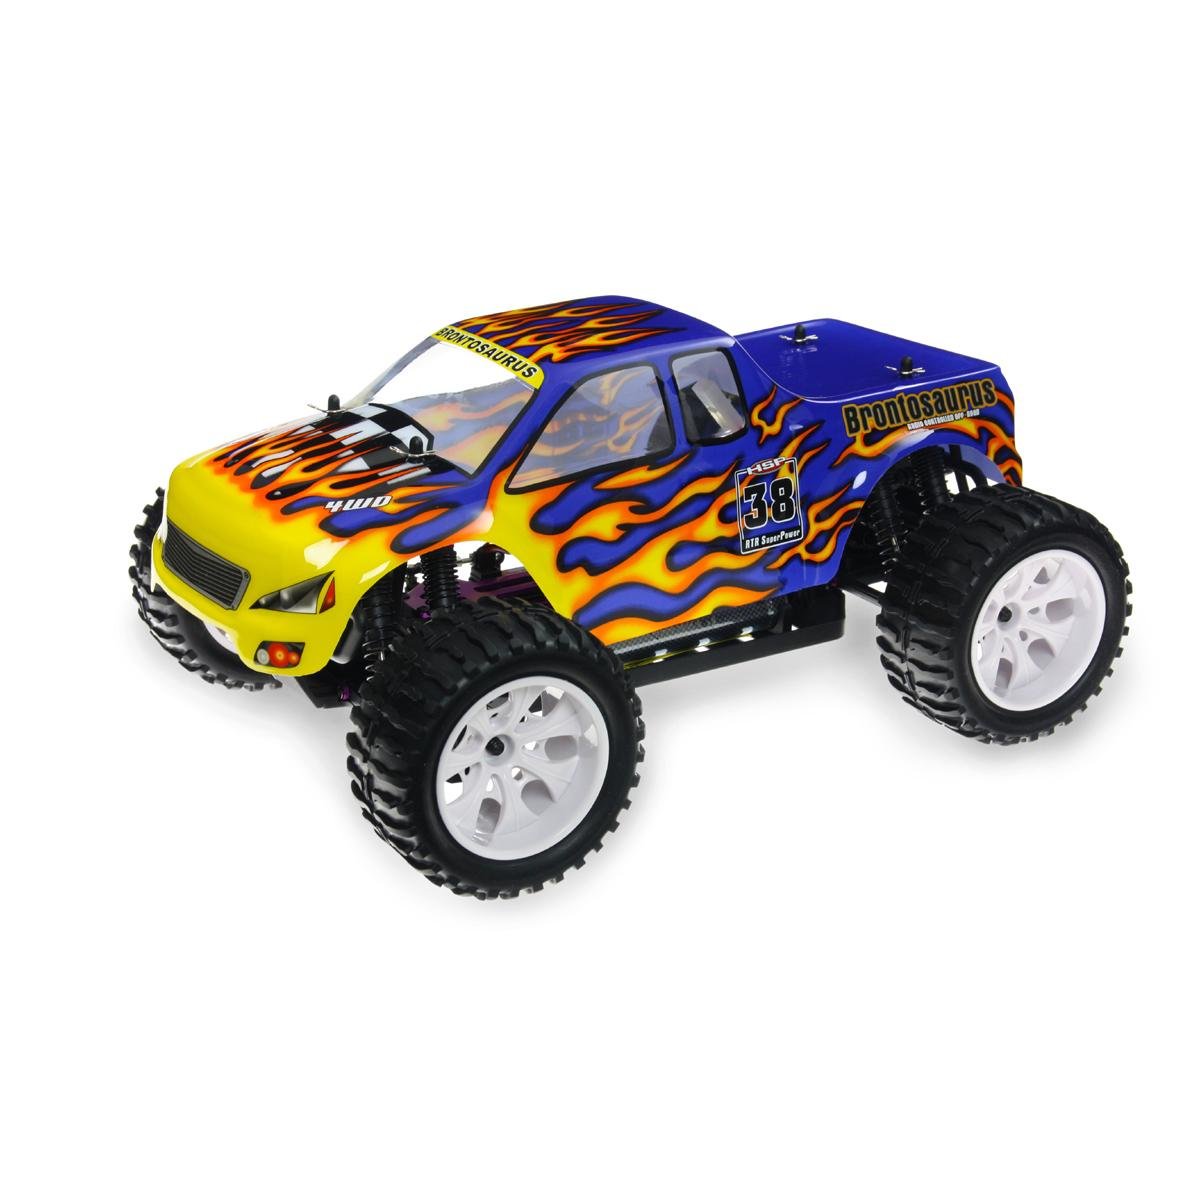 HSP 94111 BRONTOSAURUS 1/10th Scale Electric Powered Off-Road Monster Track 4